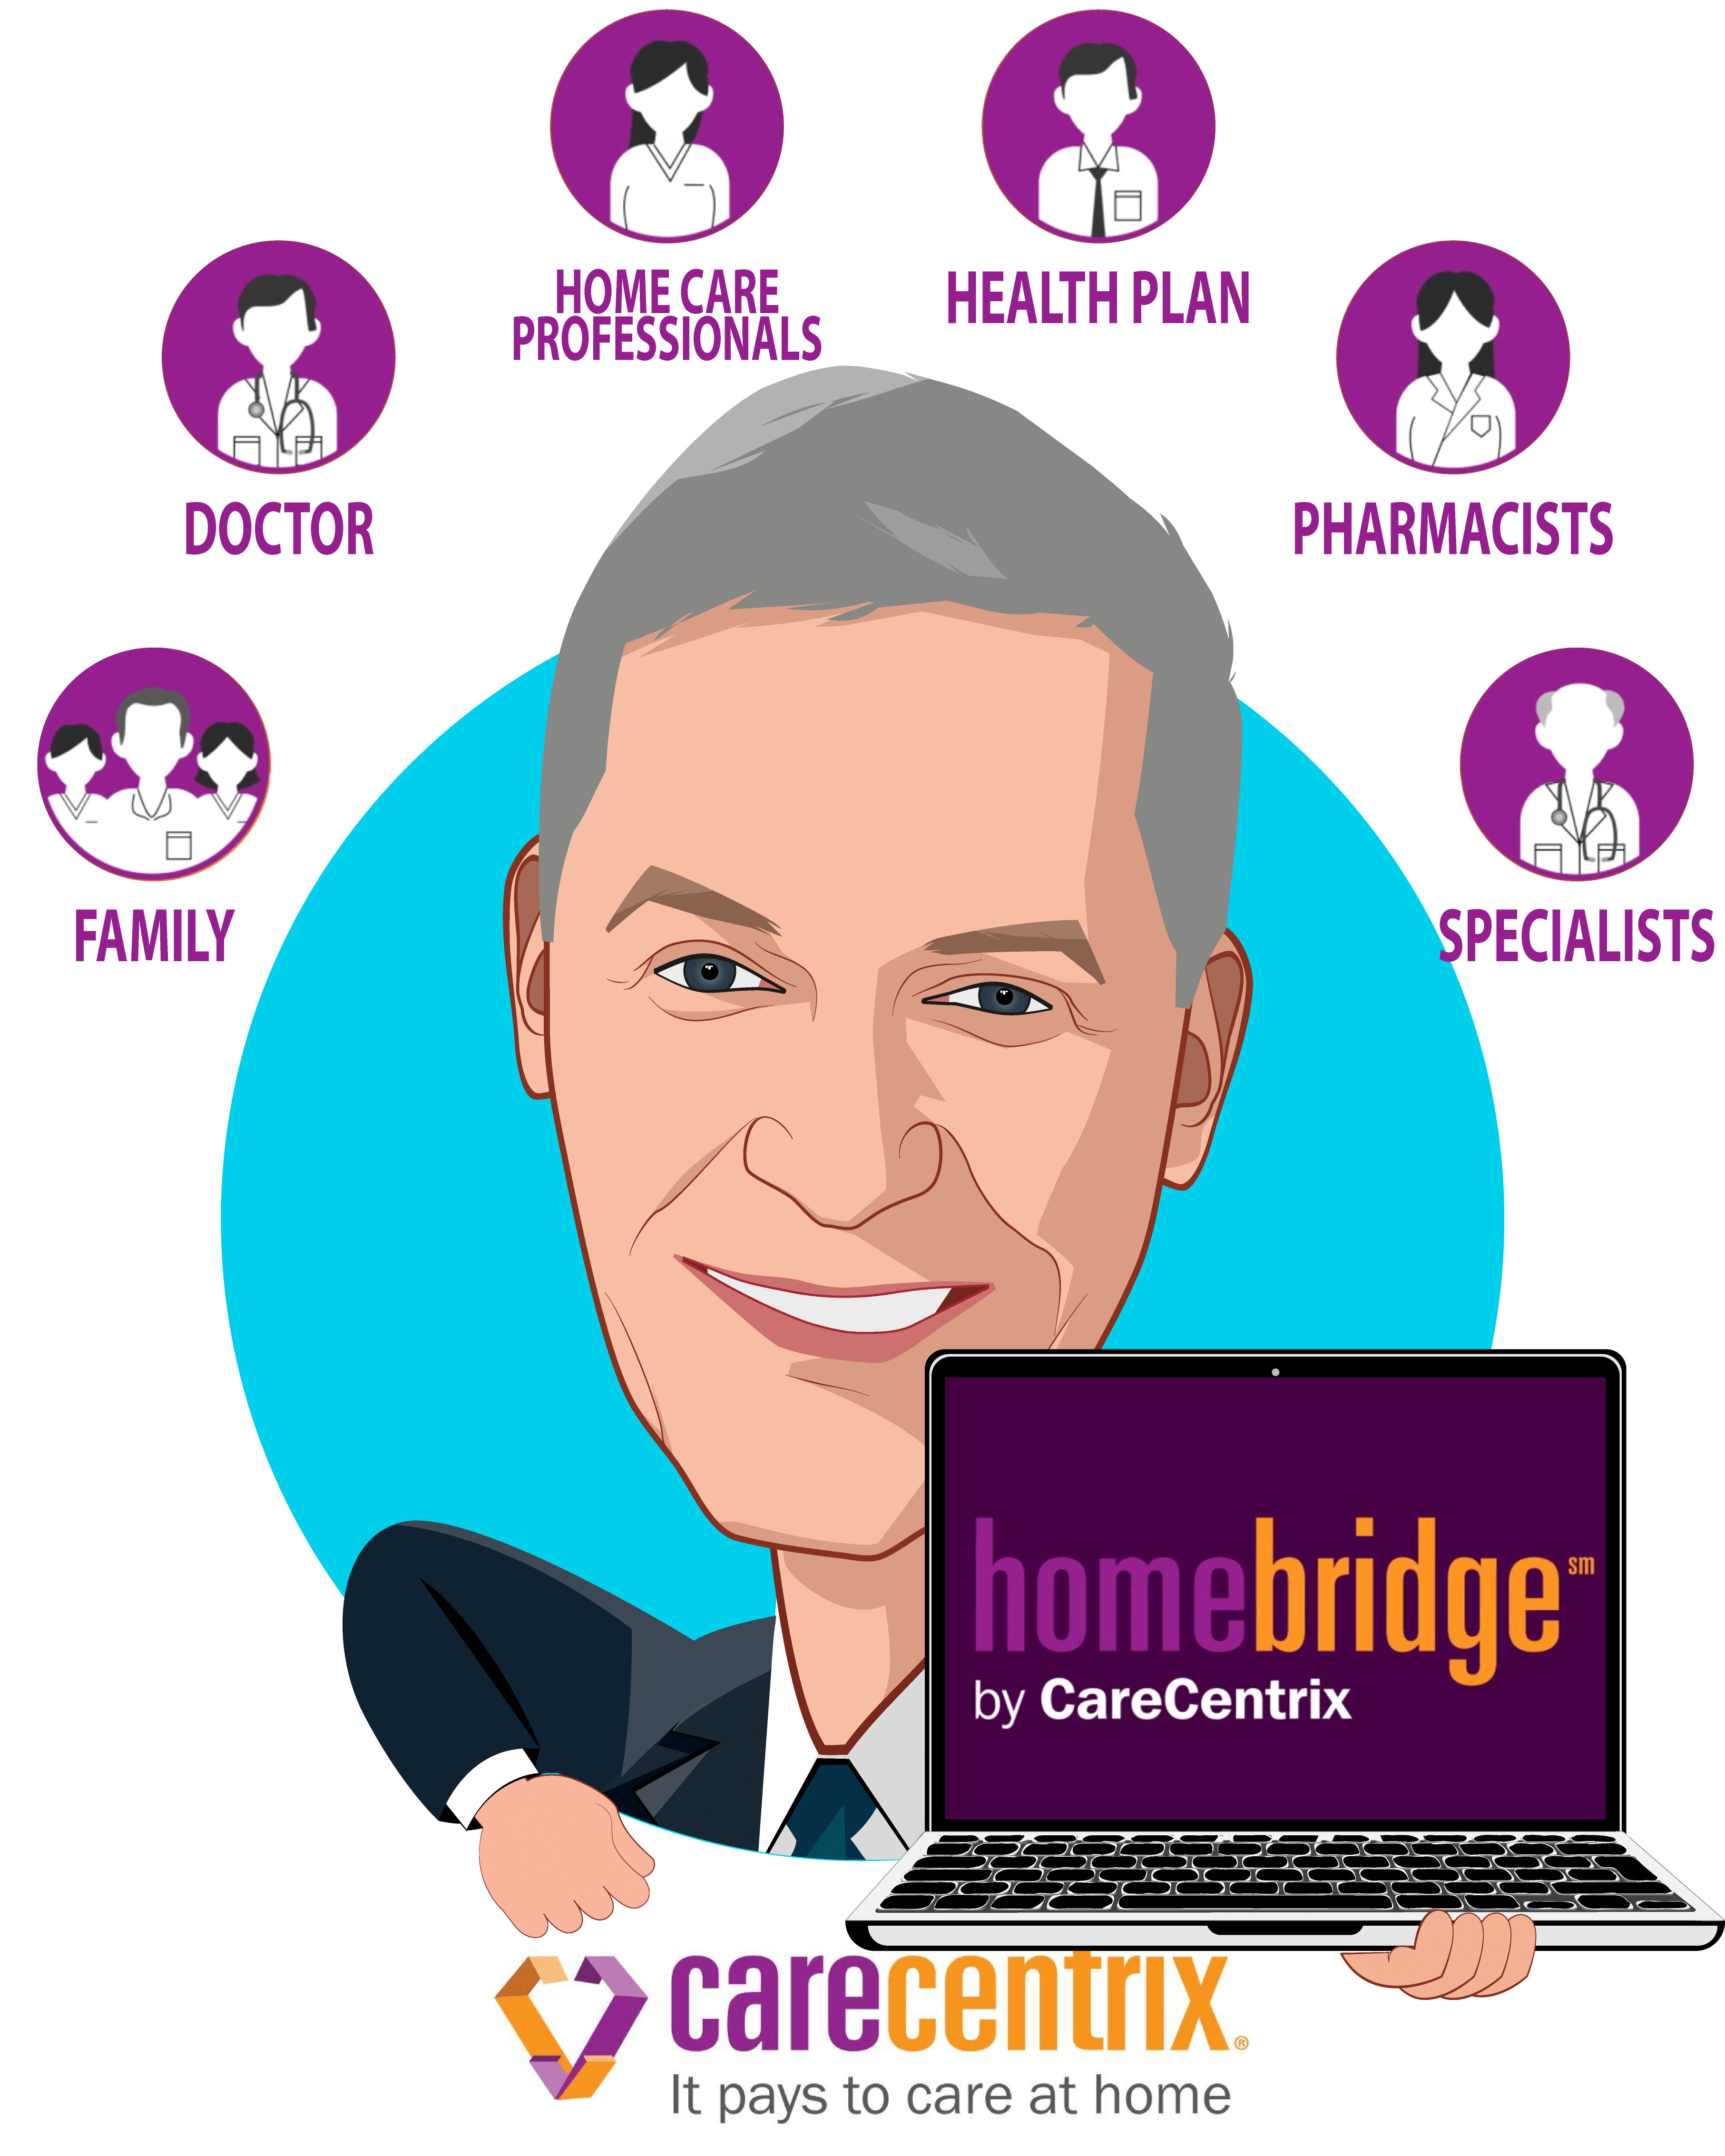 Overlay caricature of John P. Driscoll, who is speaking at HLTH and is Chief Executive Officer at CareCentrix